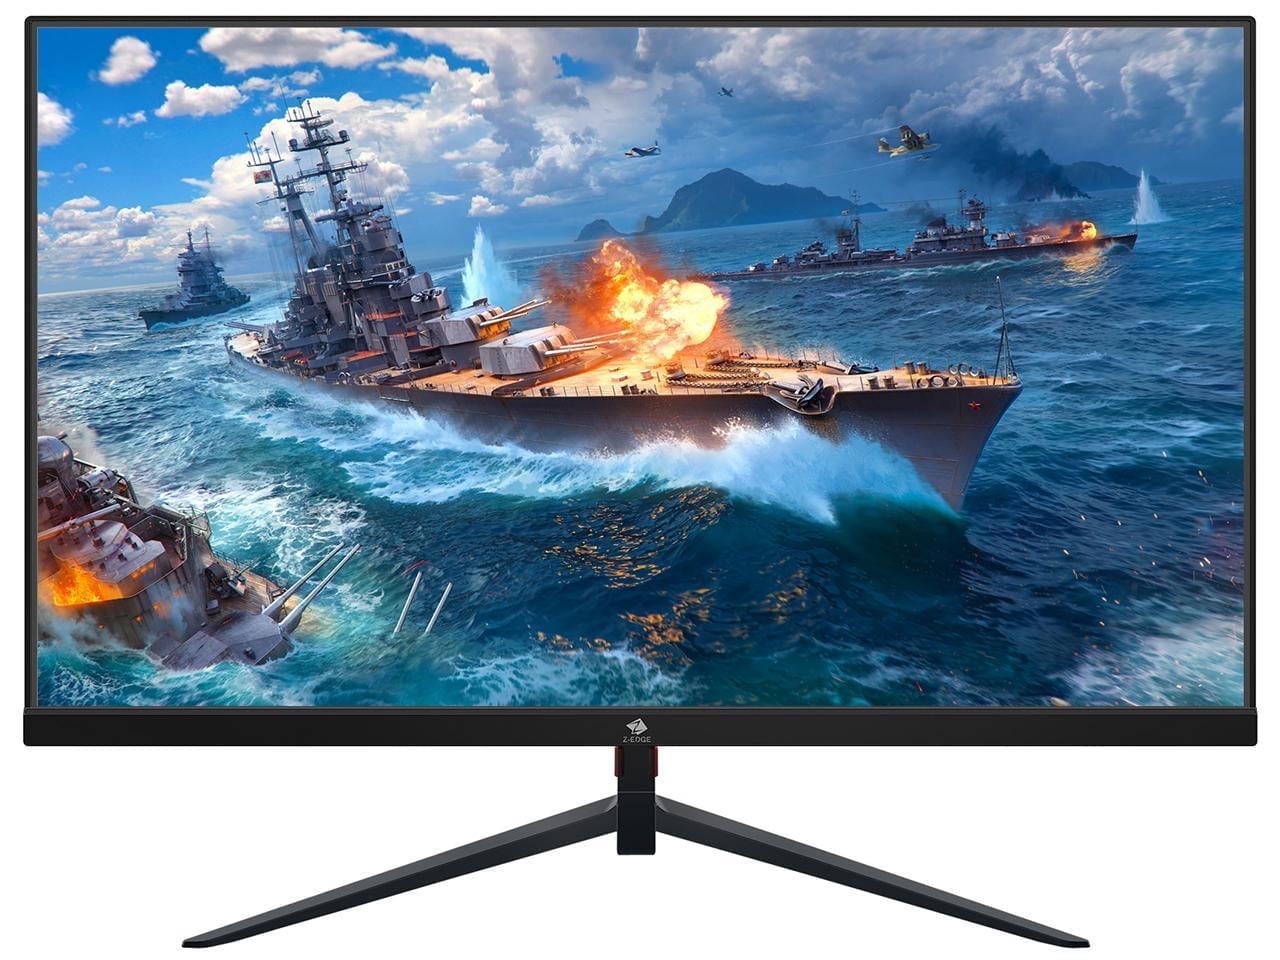 Pre-Owned Z-EDGE 25 inch Gaming Monitor, 240Hz 1ms, FHD 1920x1080, HDR10, FreeSync, 2 x HDMI, 2 x DisplayPort, Built-in Speakers, Black